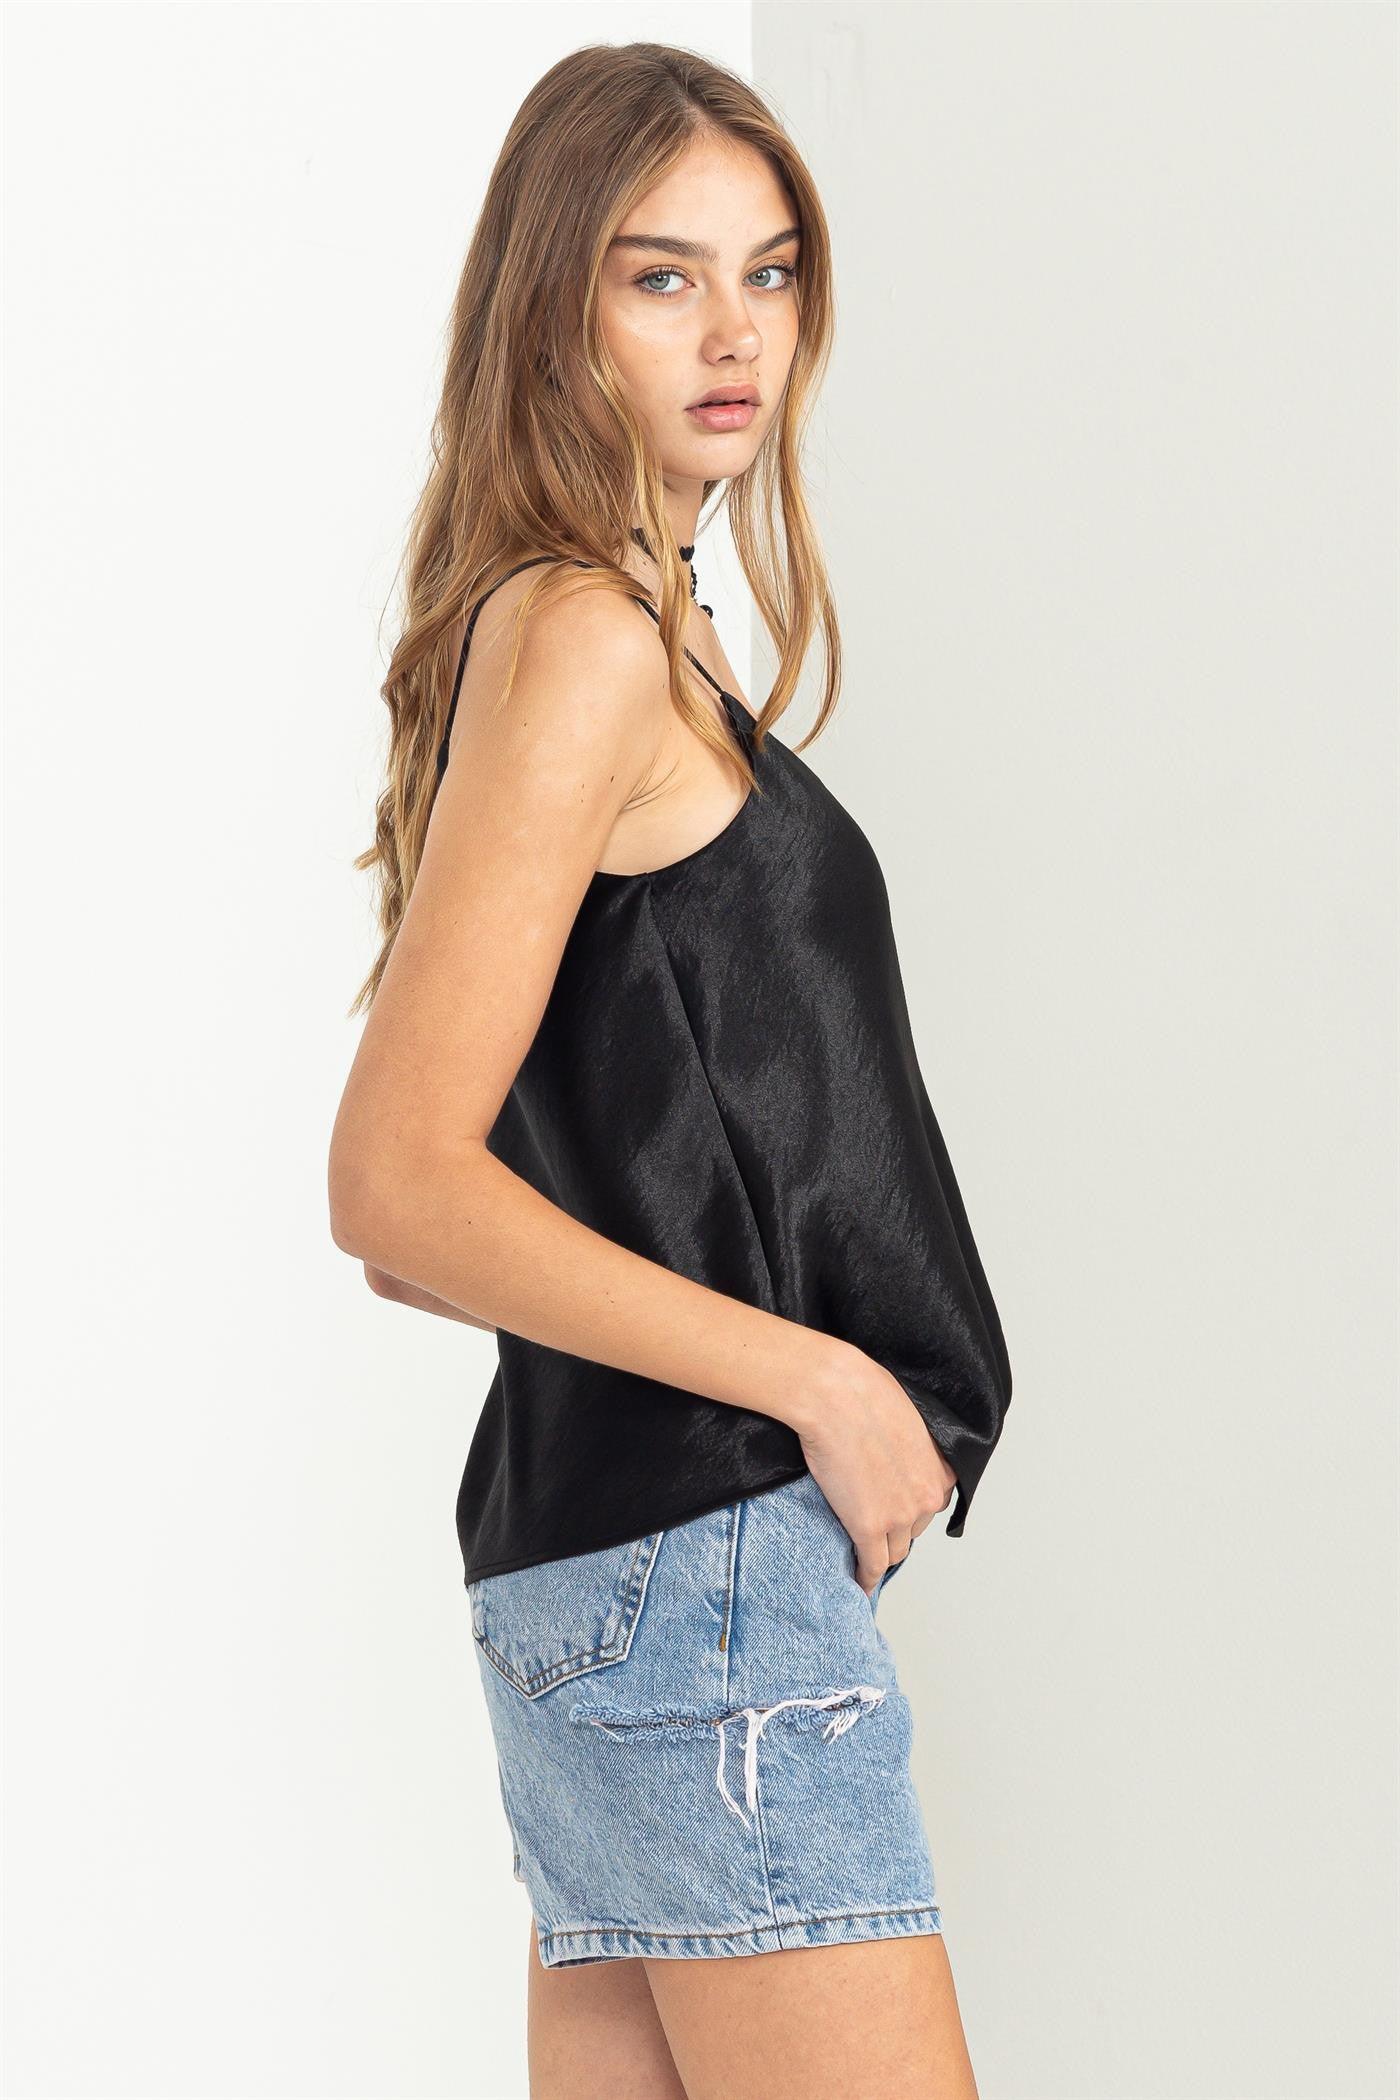 satin v neck camisole - RK Collections Boutique